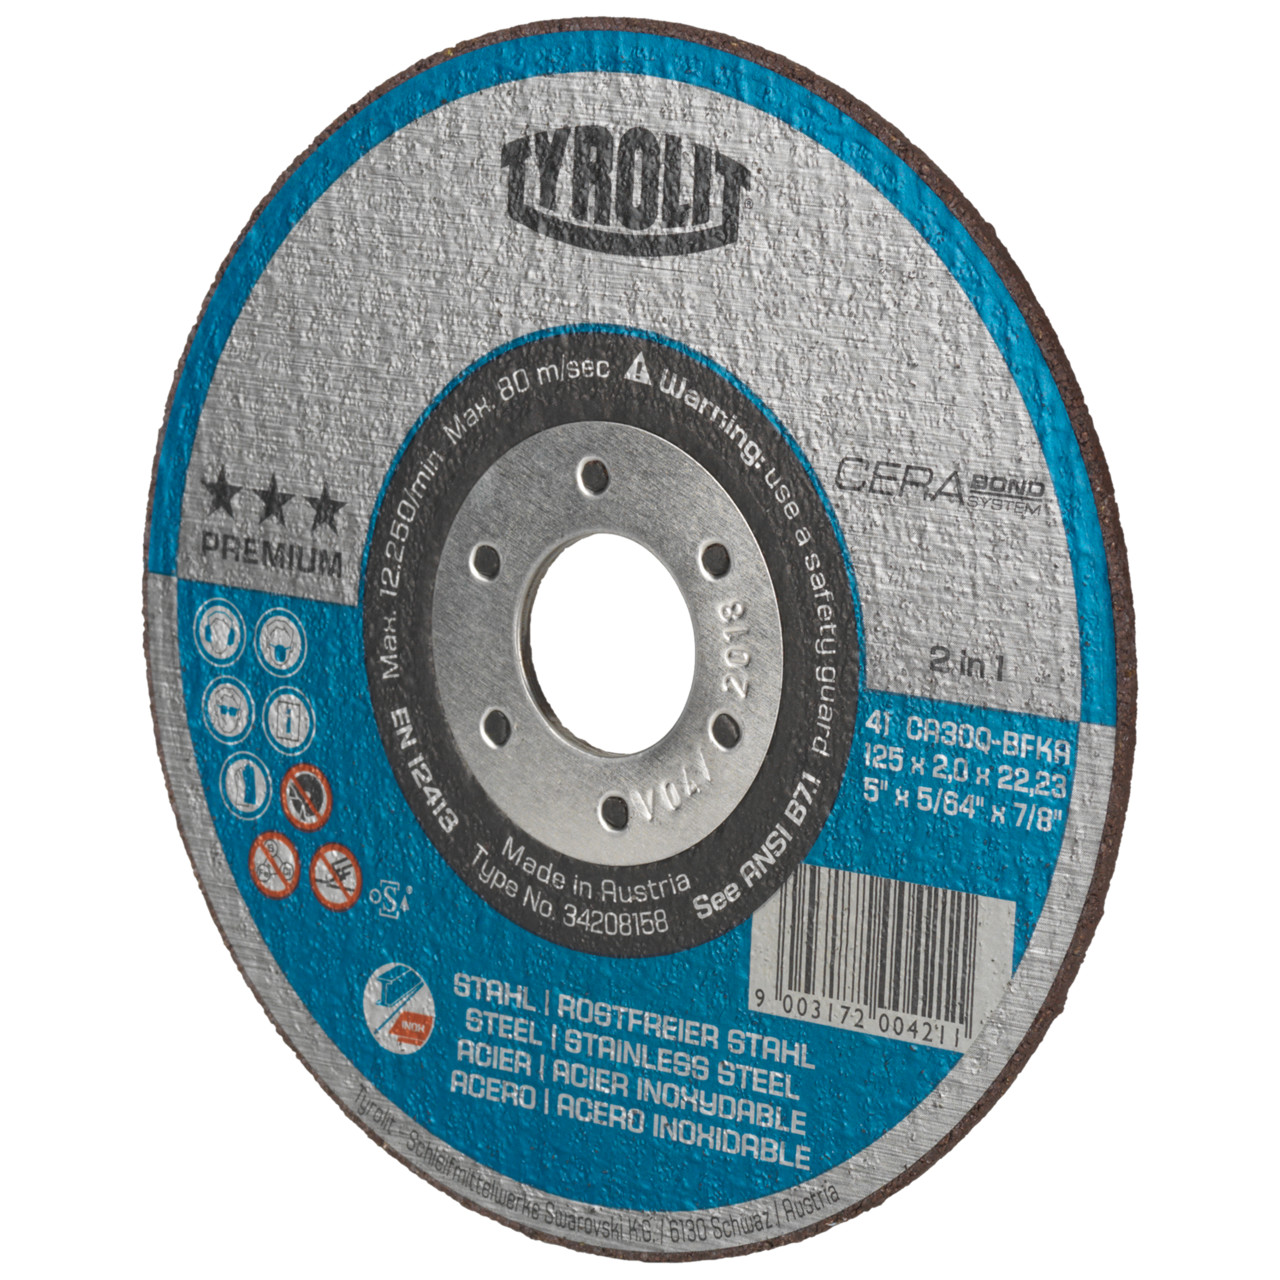 TYROLIT CERABOND Cutting disc DxDxH 115x1.3x22.23 2in1 for steel and stainless steel, shape: 41 - straight version, Art. 34256272